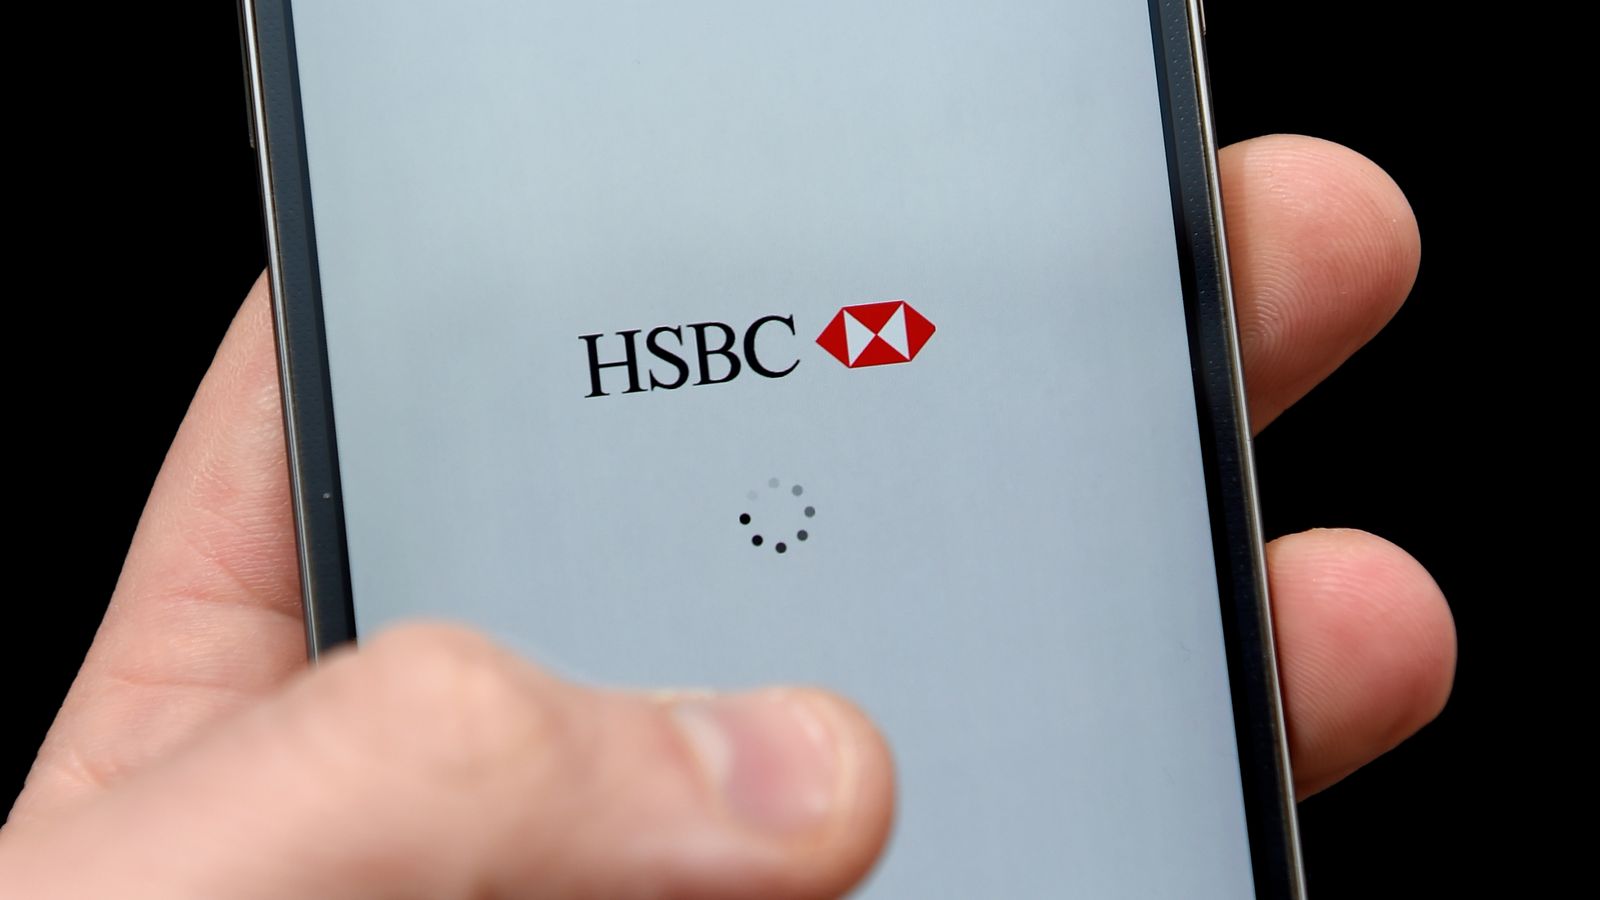 Silicon Valley Bank’s UK arm sees sharp inflows after £1 HSBC rescue